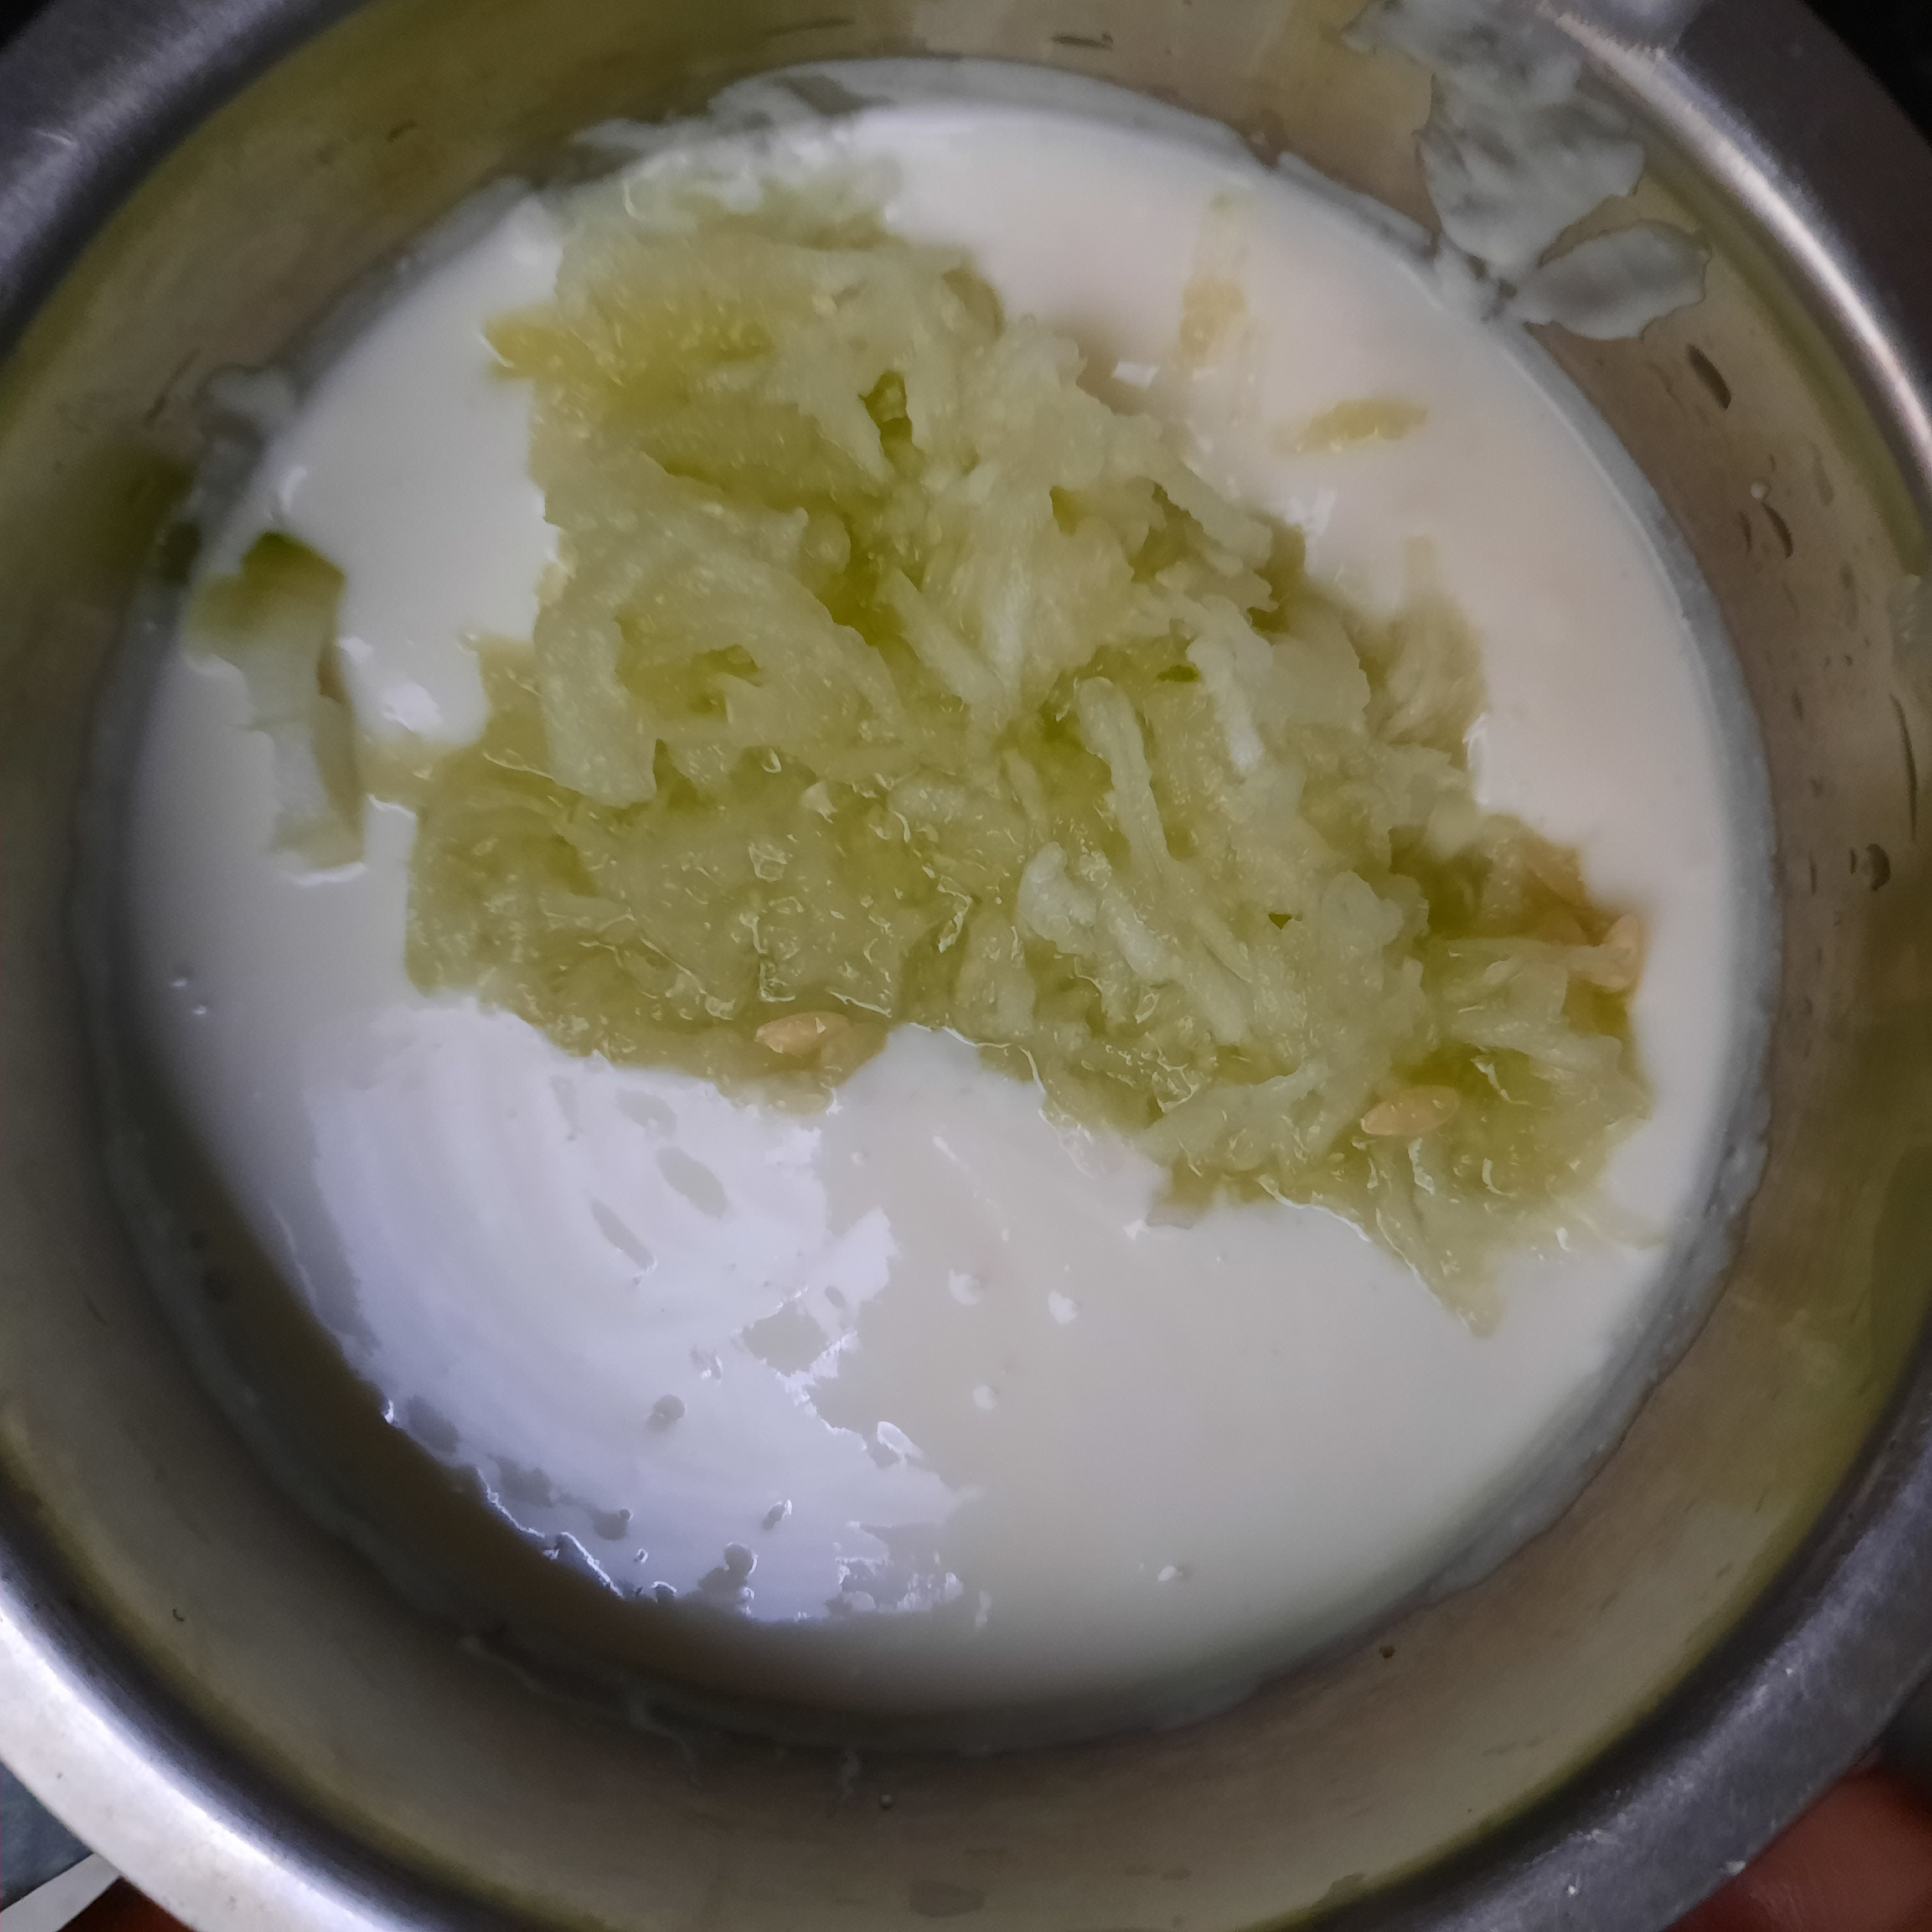 grated onions and cucumber in curd